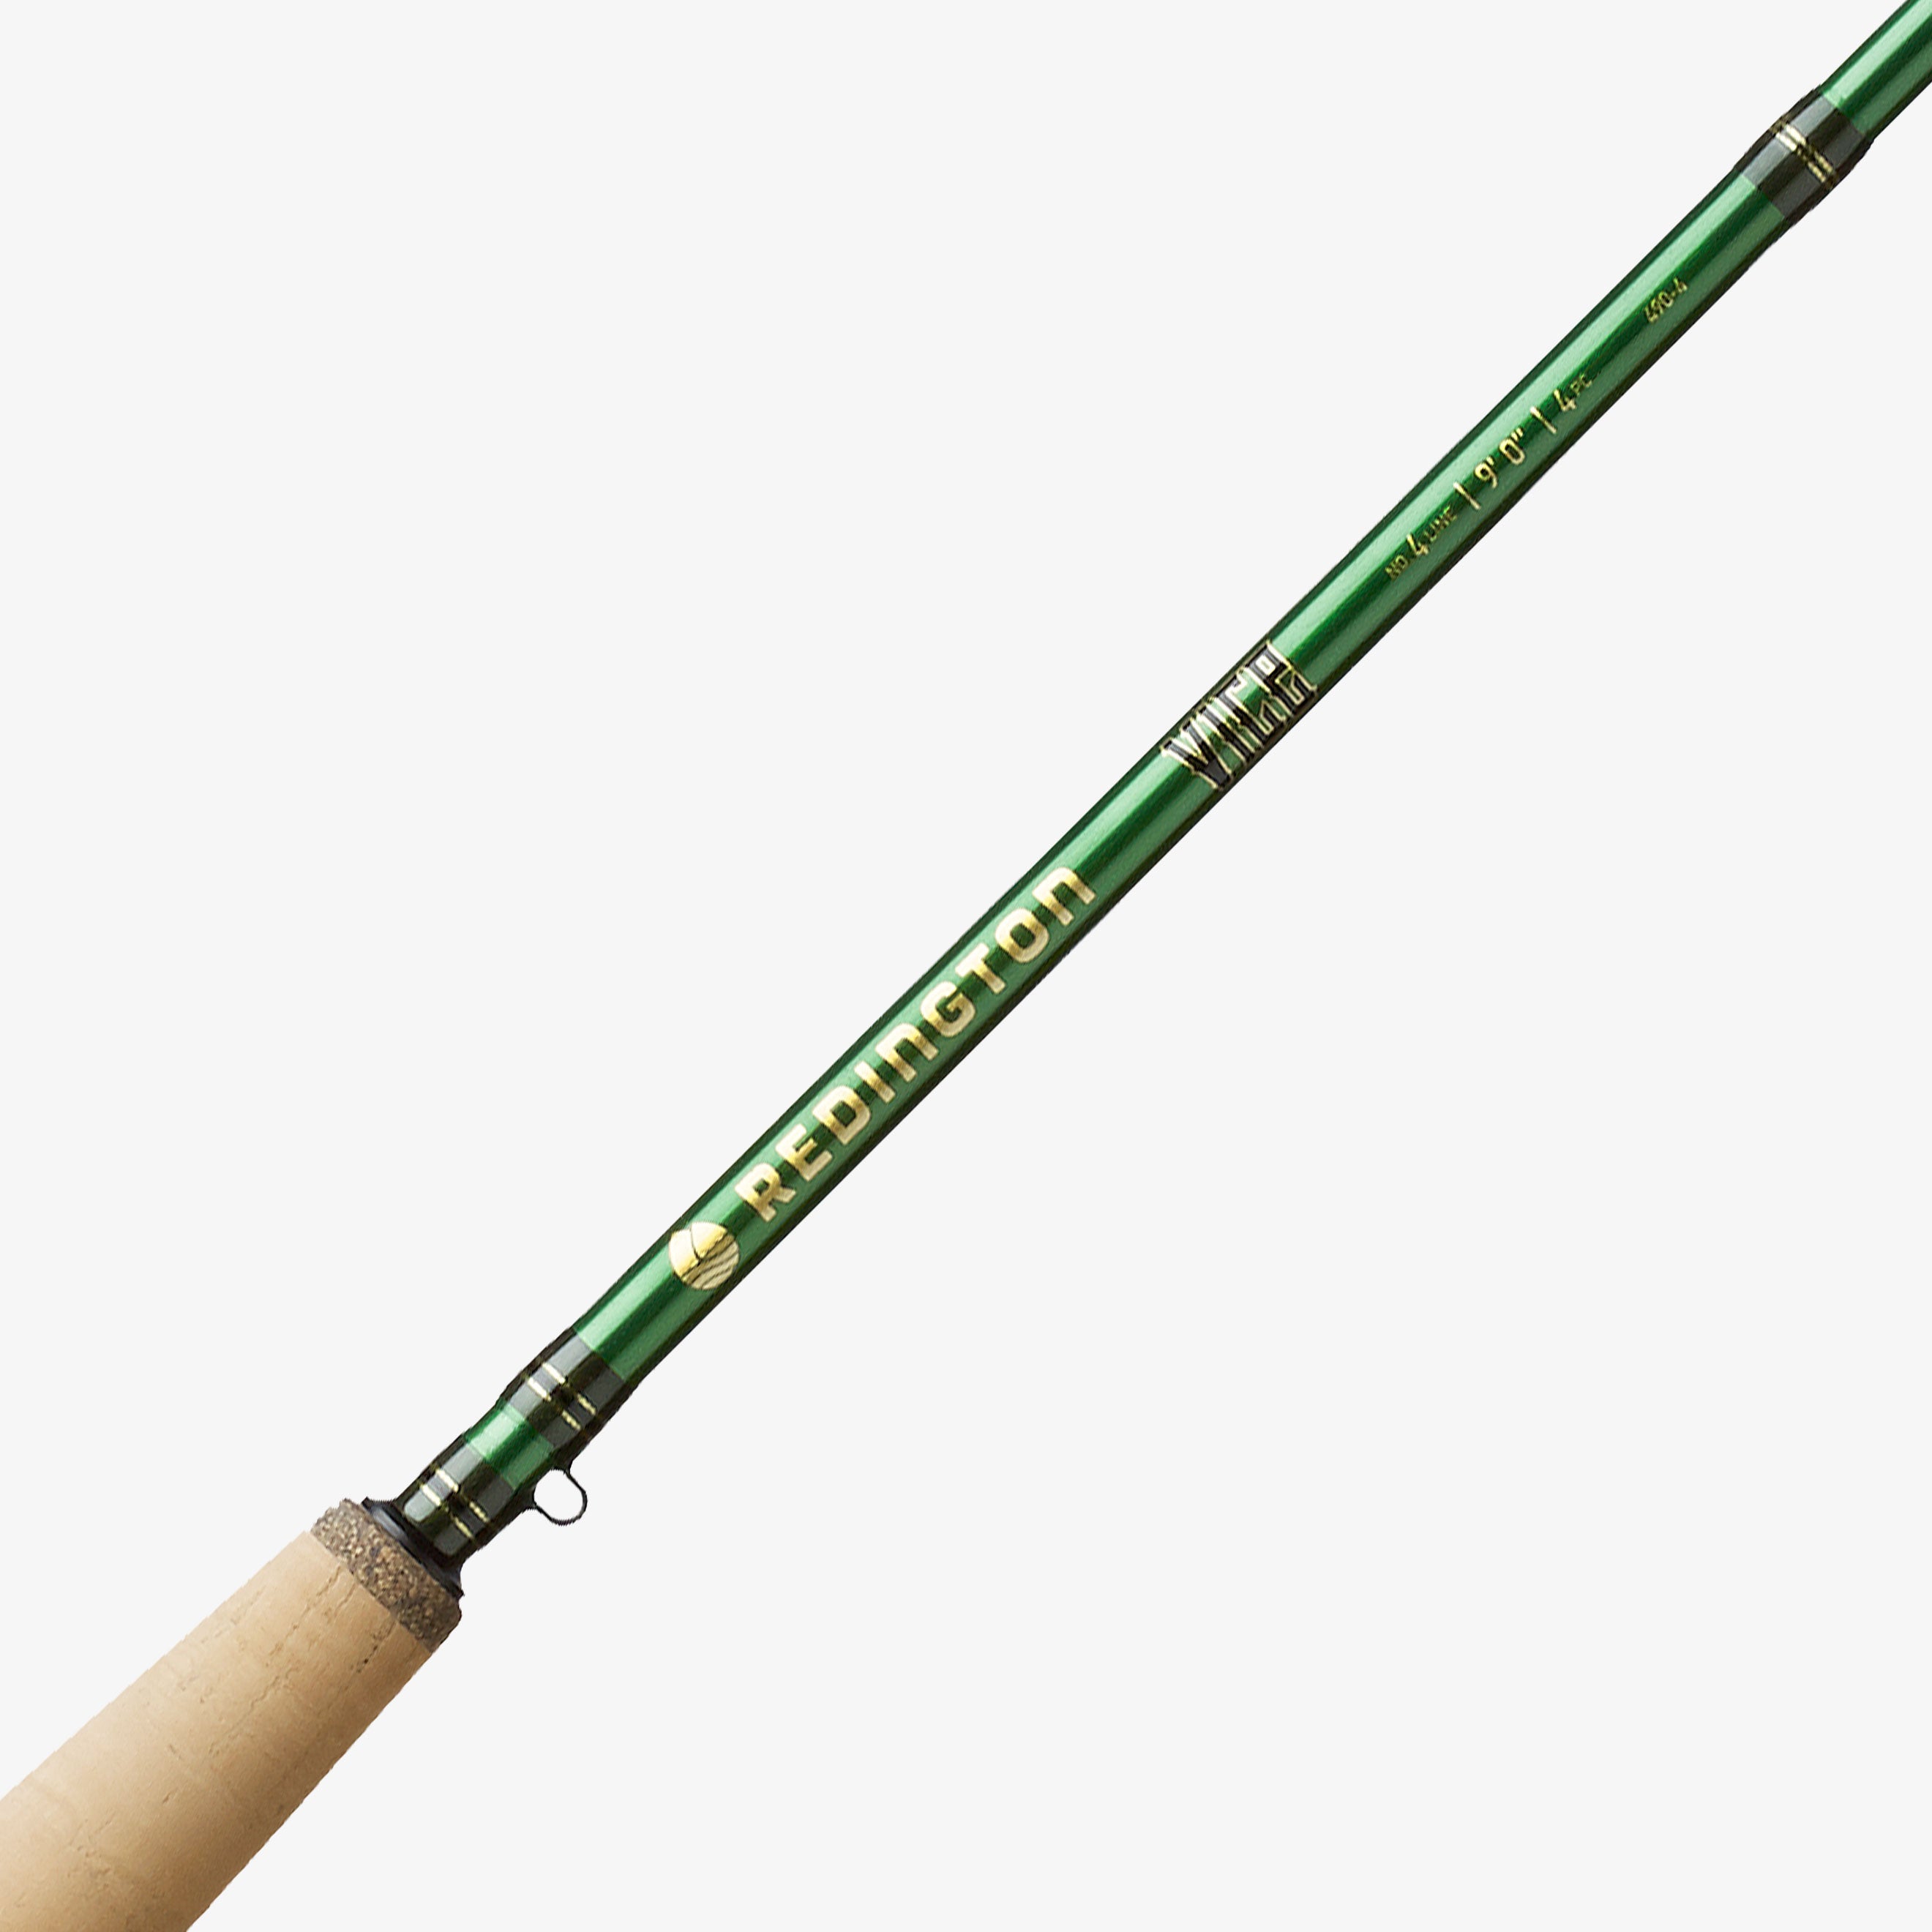 VICE Fly Fishing Rod 5 Weight, 9ft